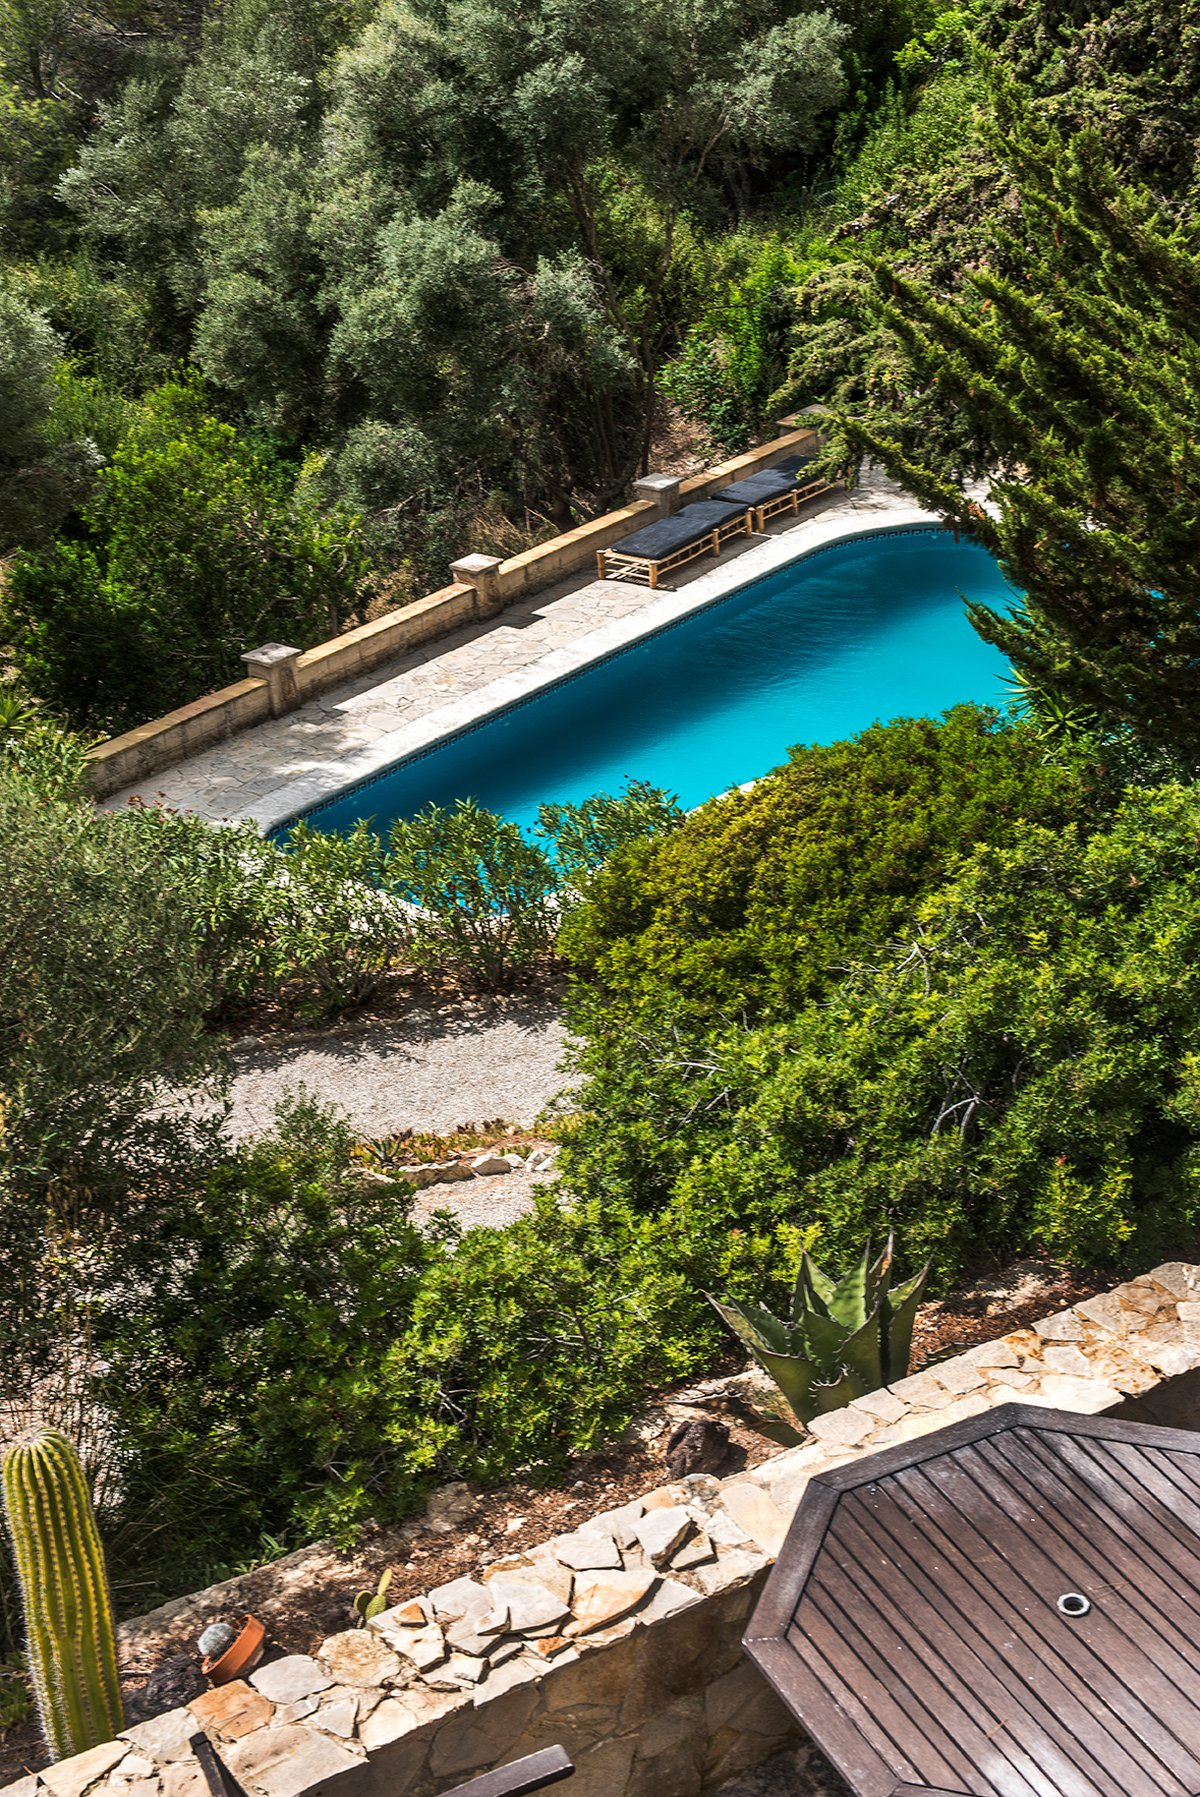 Vila Son Font is a beautiful rental home in Mallorca decorated with bamboo sunbeds